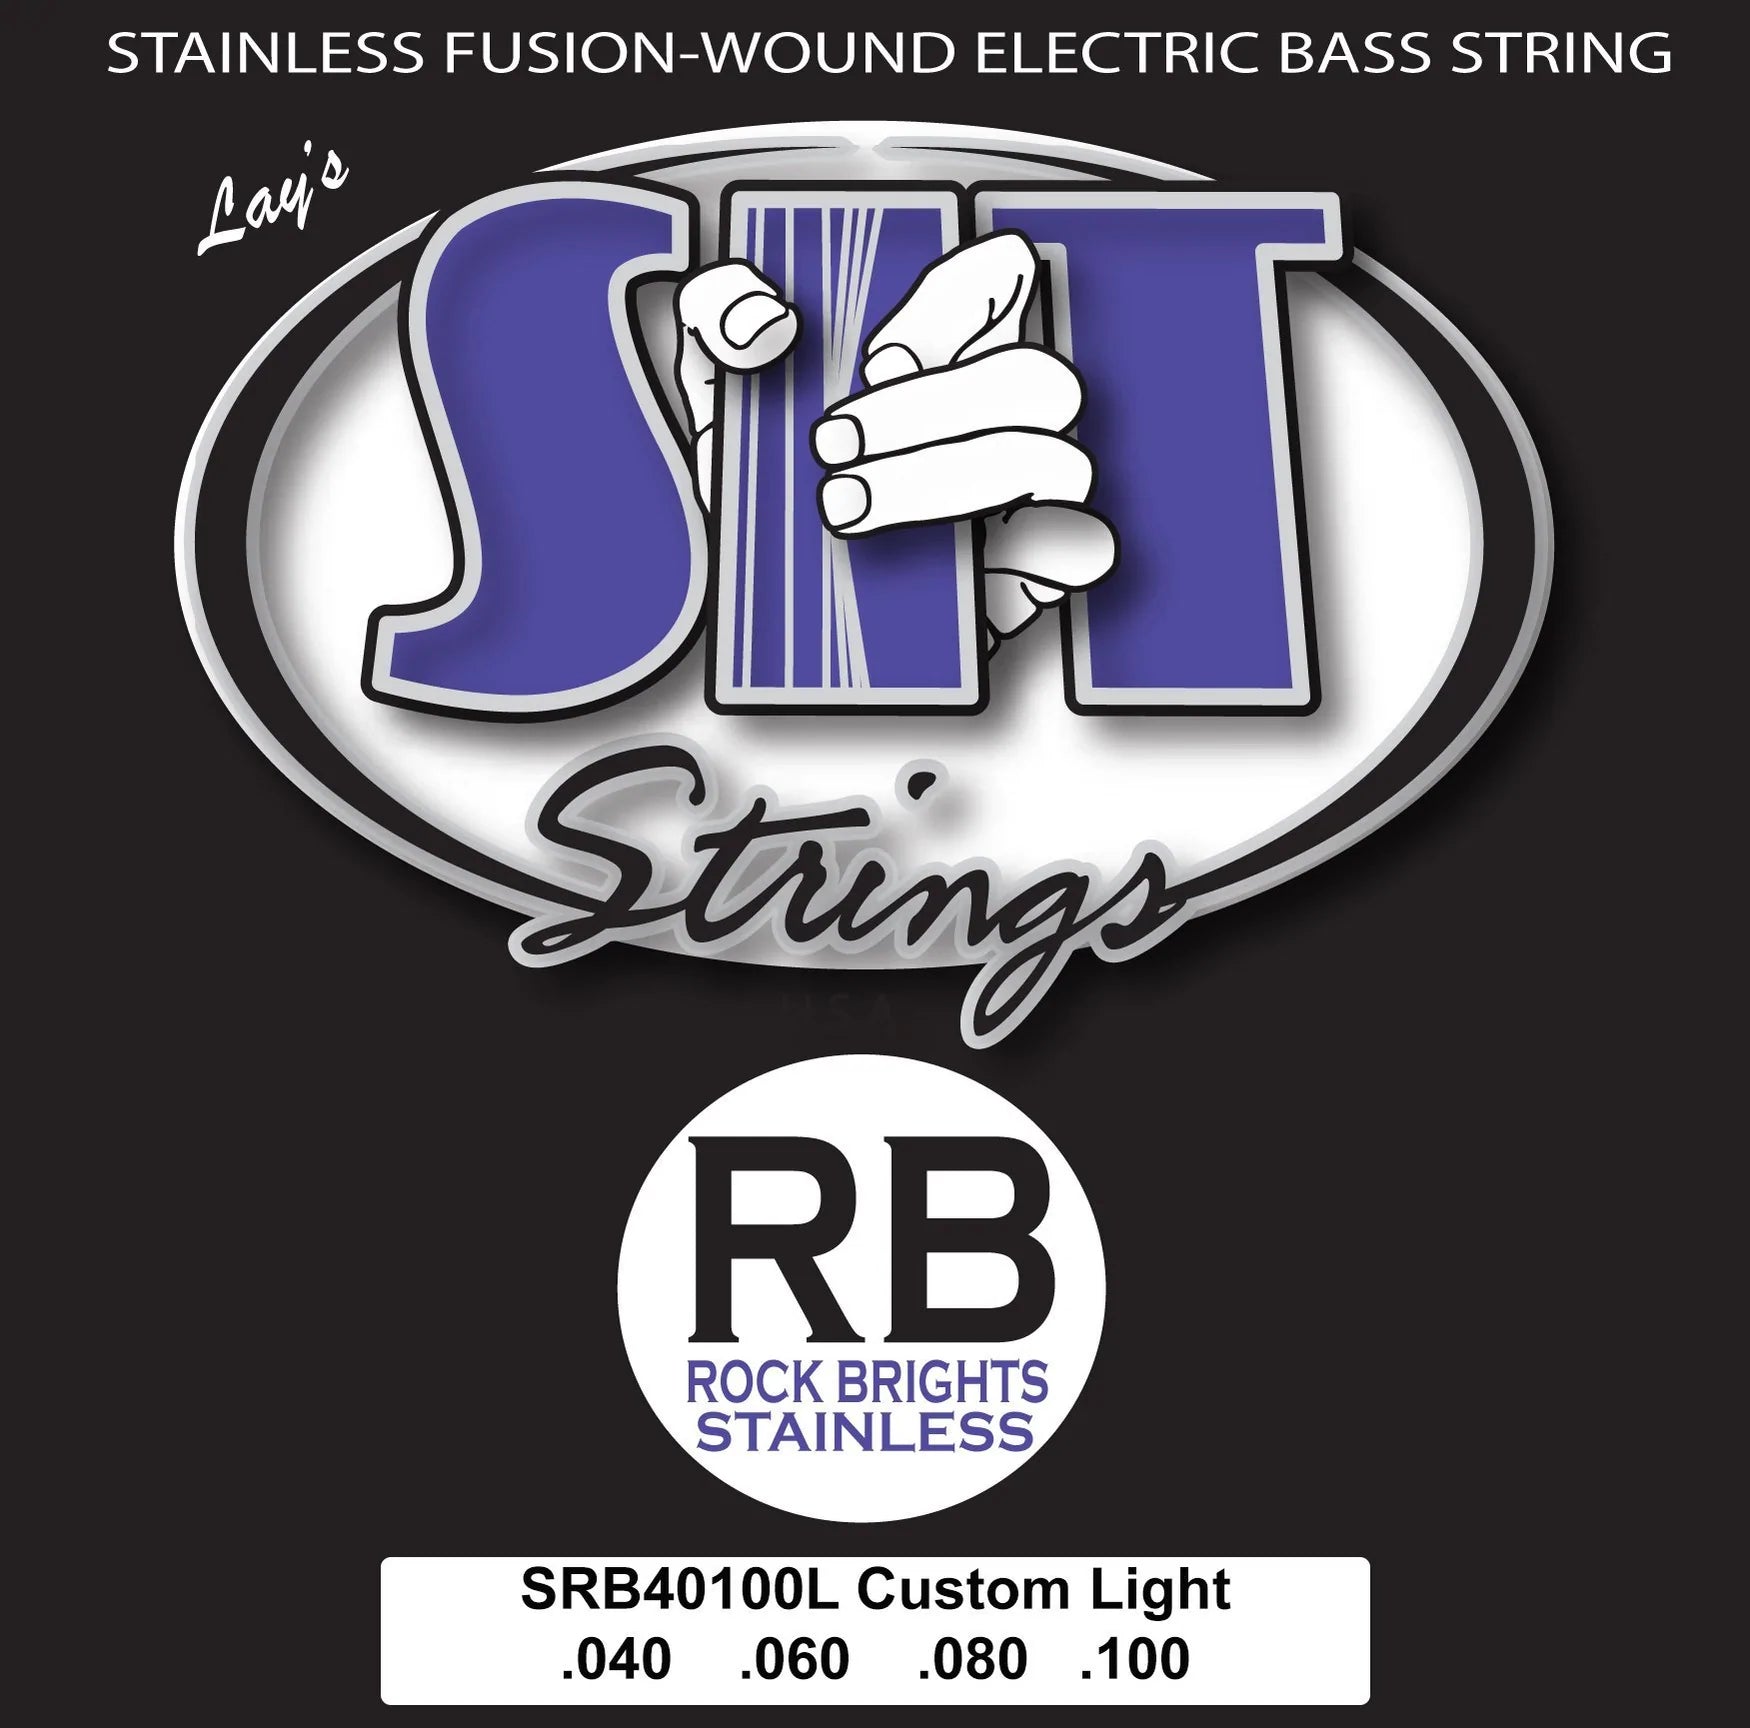 SIT ROCK BRIGHT STAINLESS STEEL BASS - HIENDGUITAR SRB40100L CUSTOM LIGHT SRB40100L CUSTOM LIGHT SIT Bass Strings